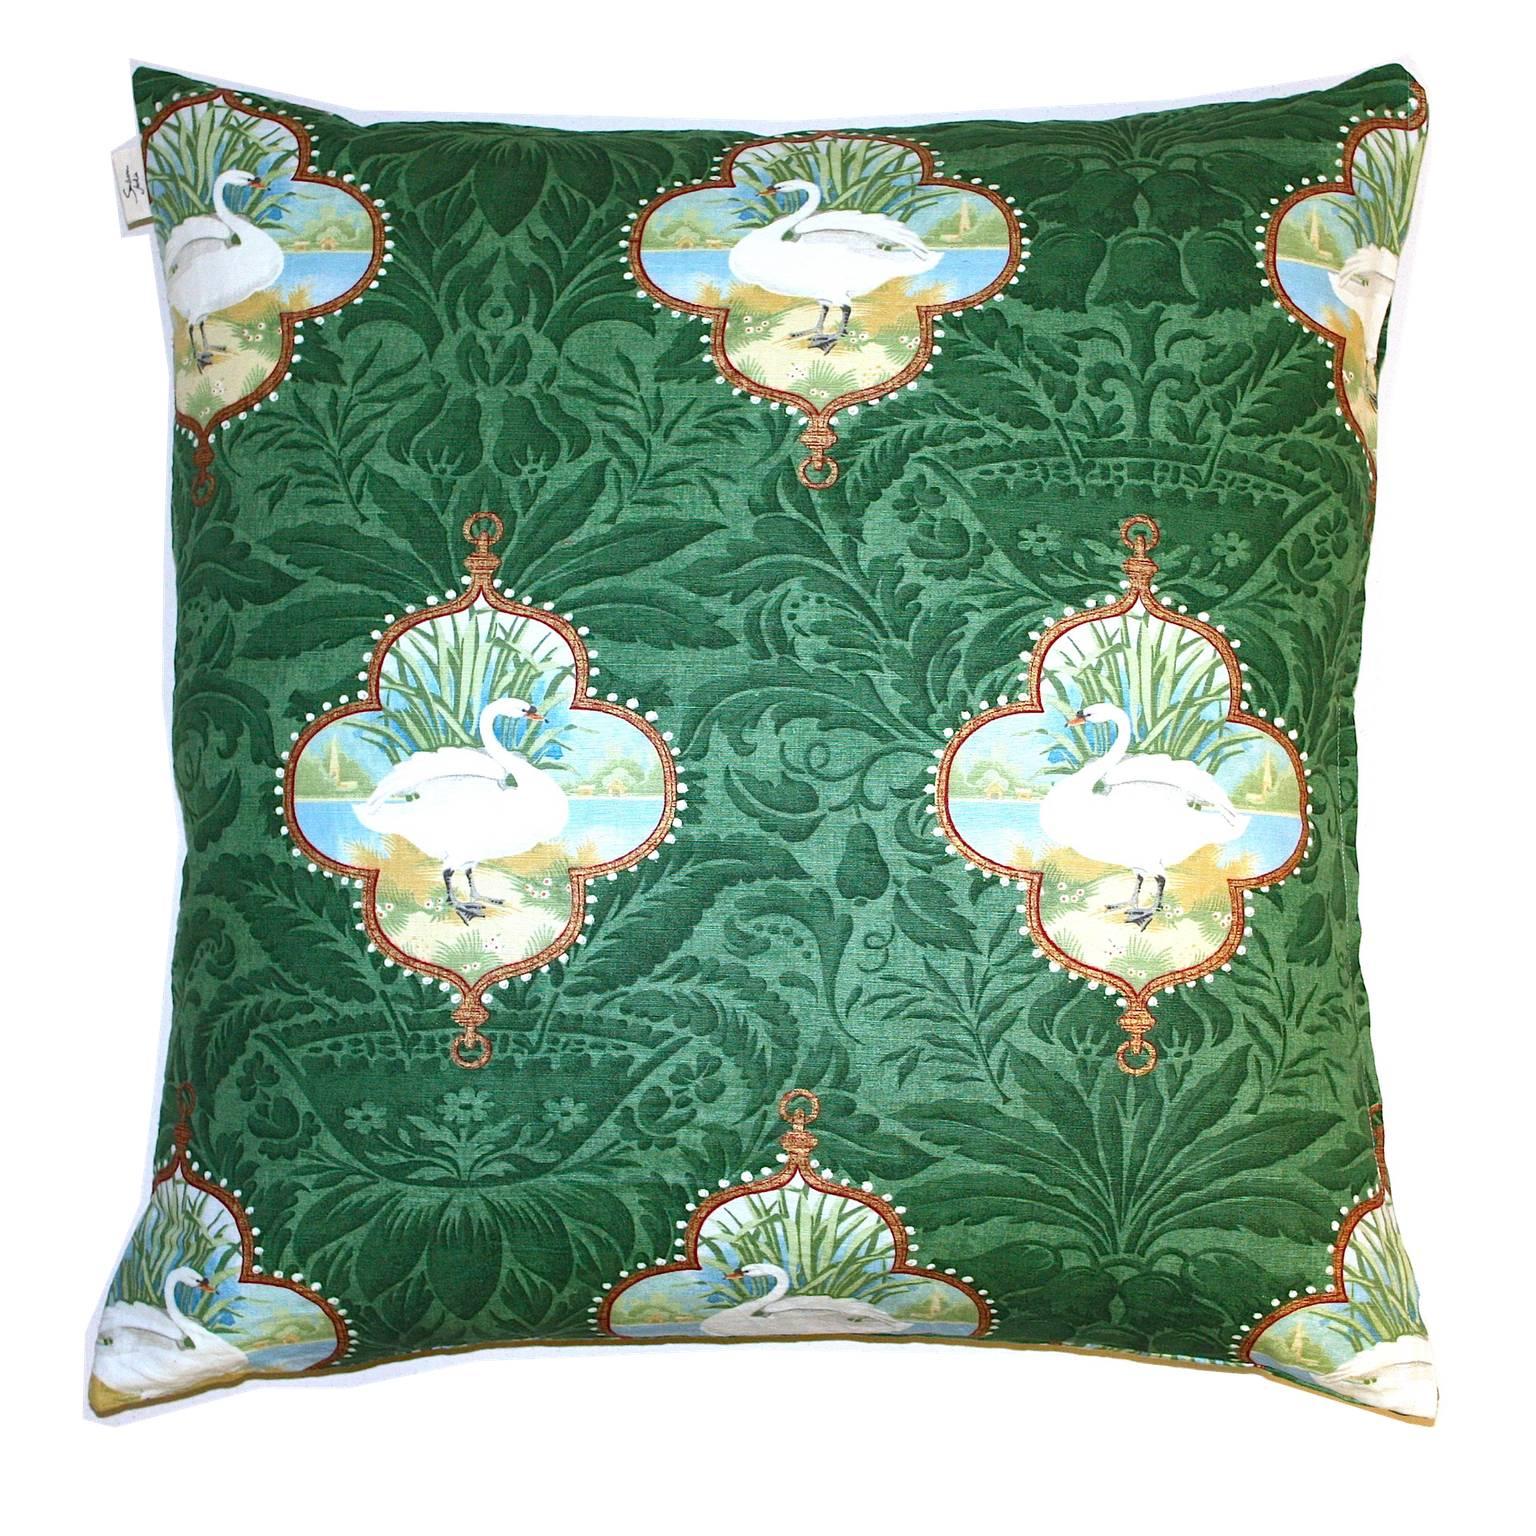 'Orient Express' is a one-off large floor cushion made using vintage 'Linderhof' Osbourne and Little linen from Sunbeam Jackie, perfect for adorning an antique sofa or outdoor seating arrangement.

Handmade in Cornwall, England.
Each cushion is